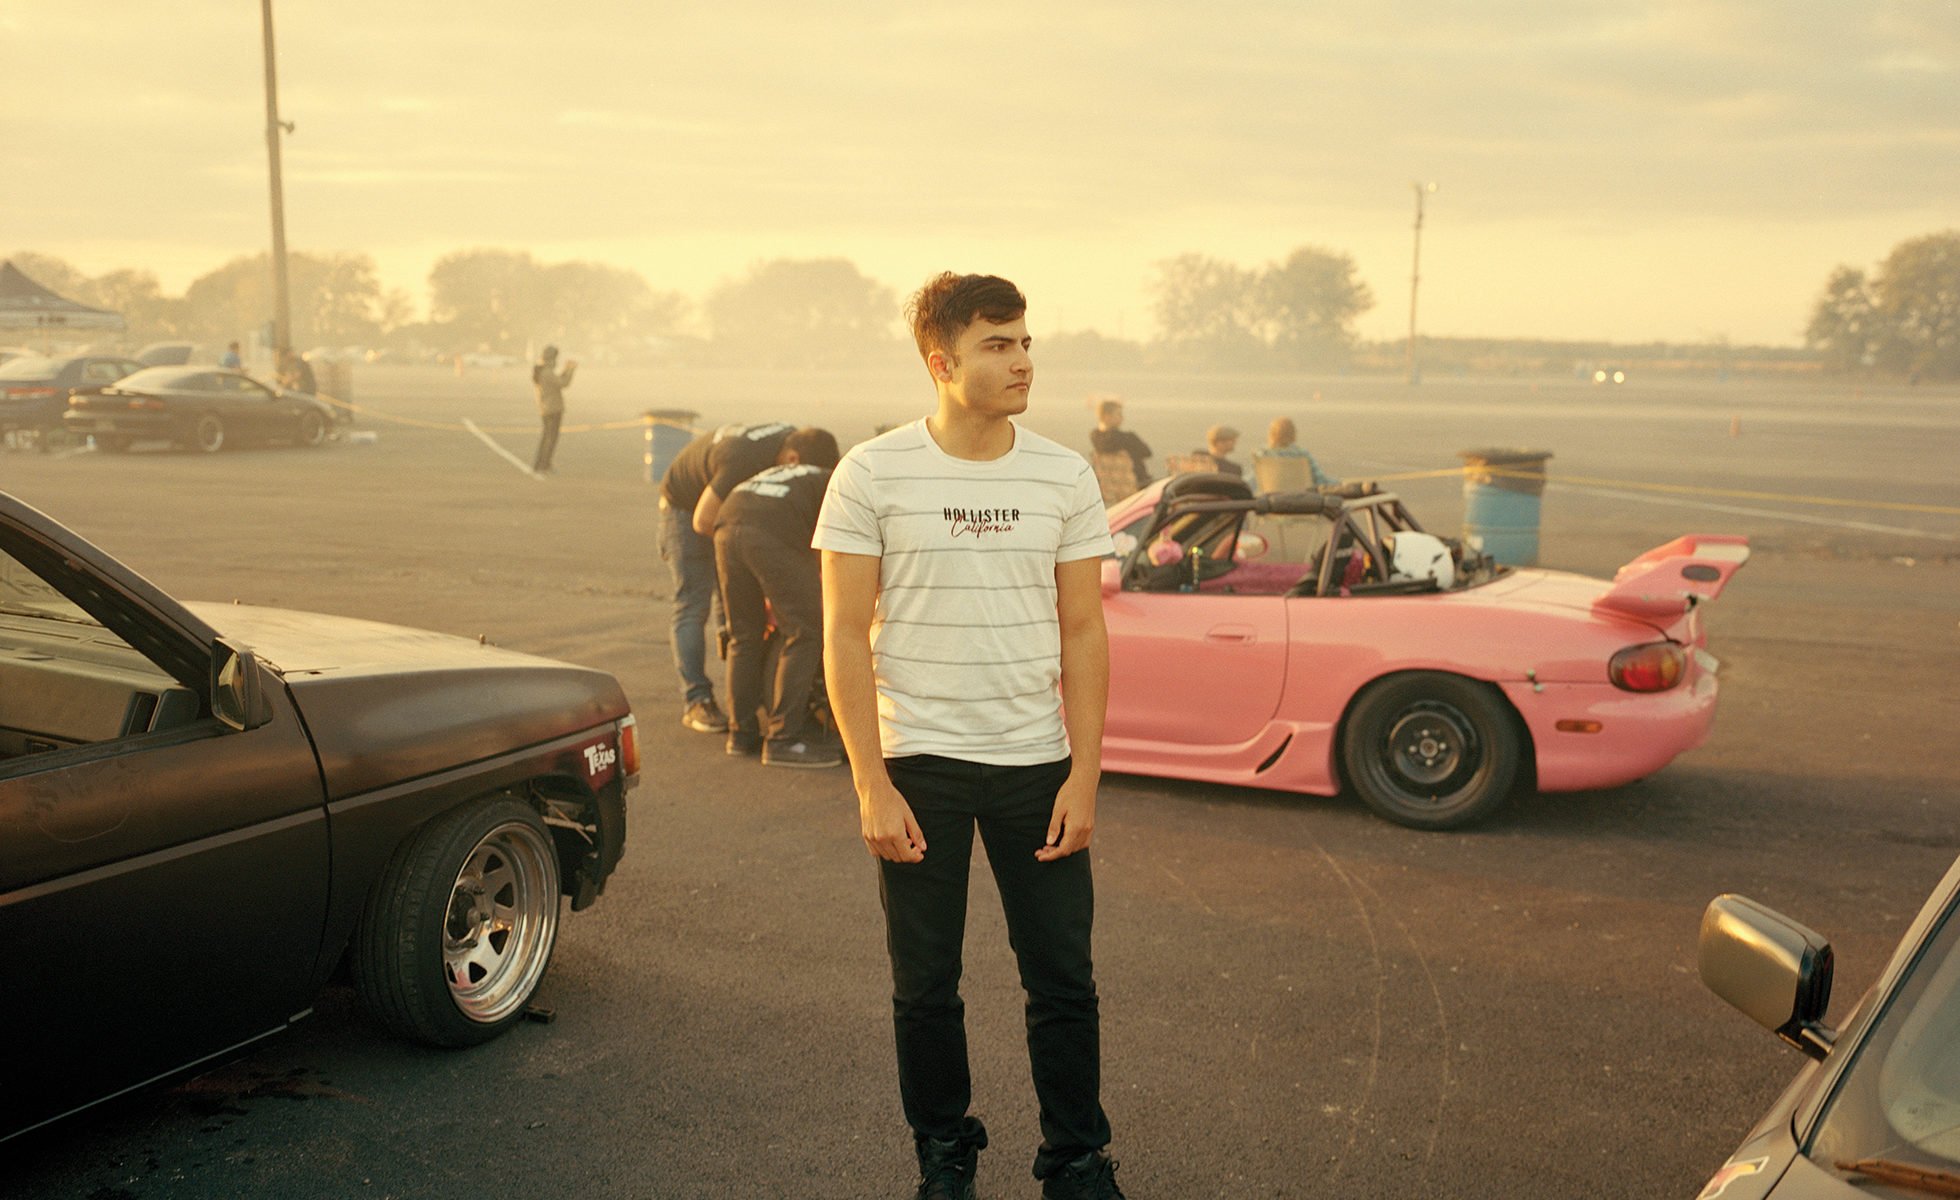 David Keshmiri, 18, attends a car race at the San Antonio Raceway in November 2019. Keshmiri, who works at a car dealership and is studying for a business degree at Alamo College, has a passion for cars and hopes to join those who race on the track every month. He and his family arrived in the United States from Iran when he was 12.